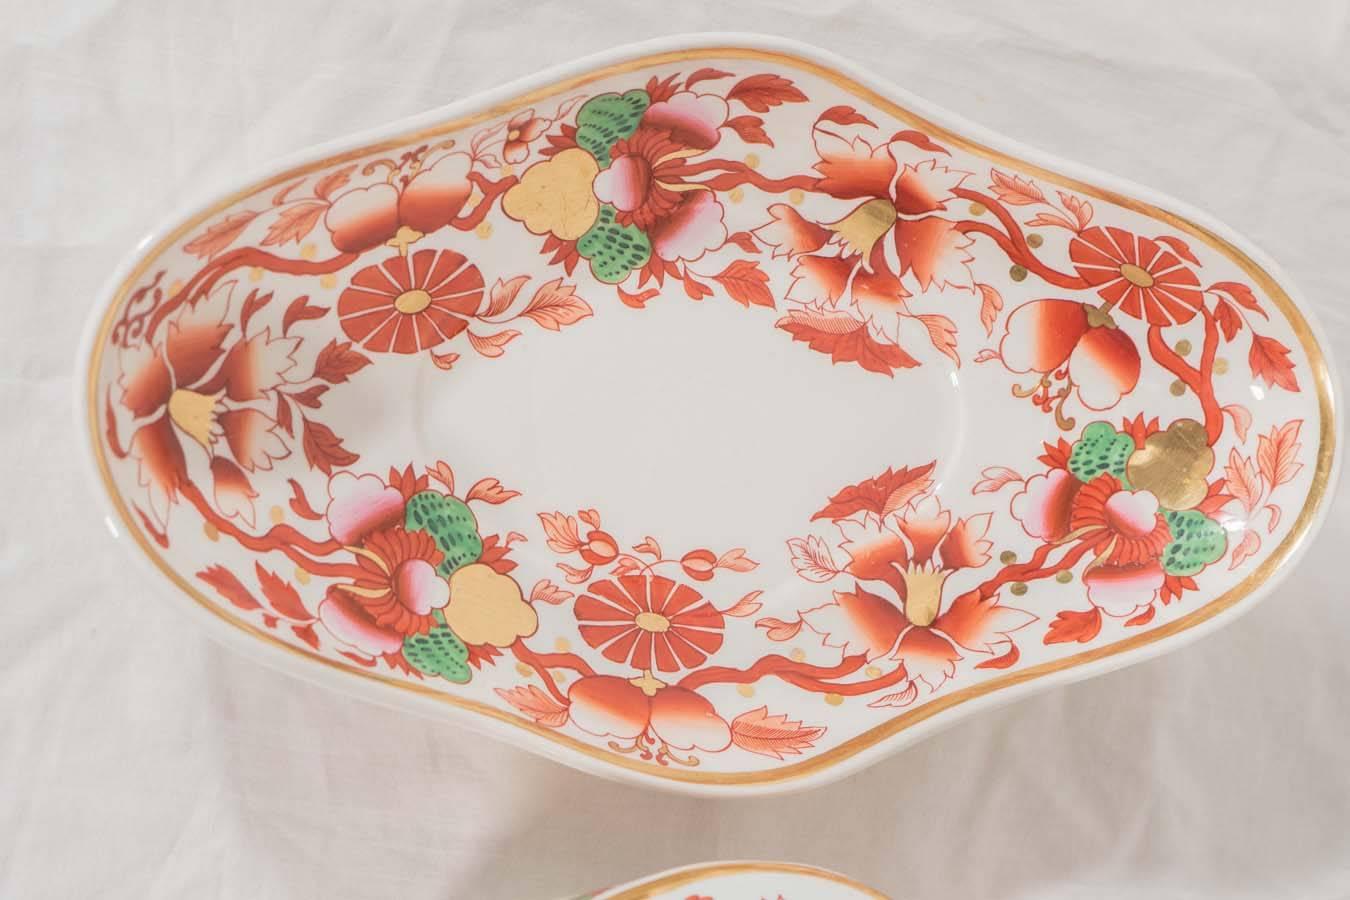 Earthenware Pair Antique Spode Tureens Painted in Orange Pink and Green